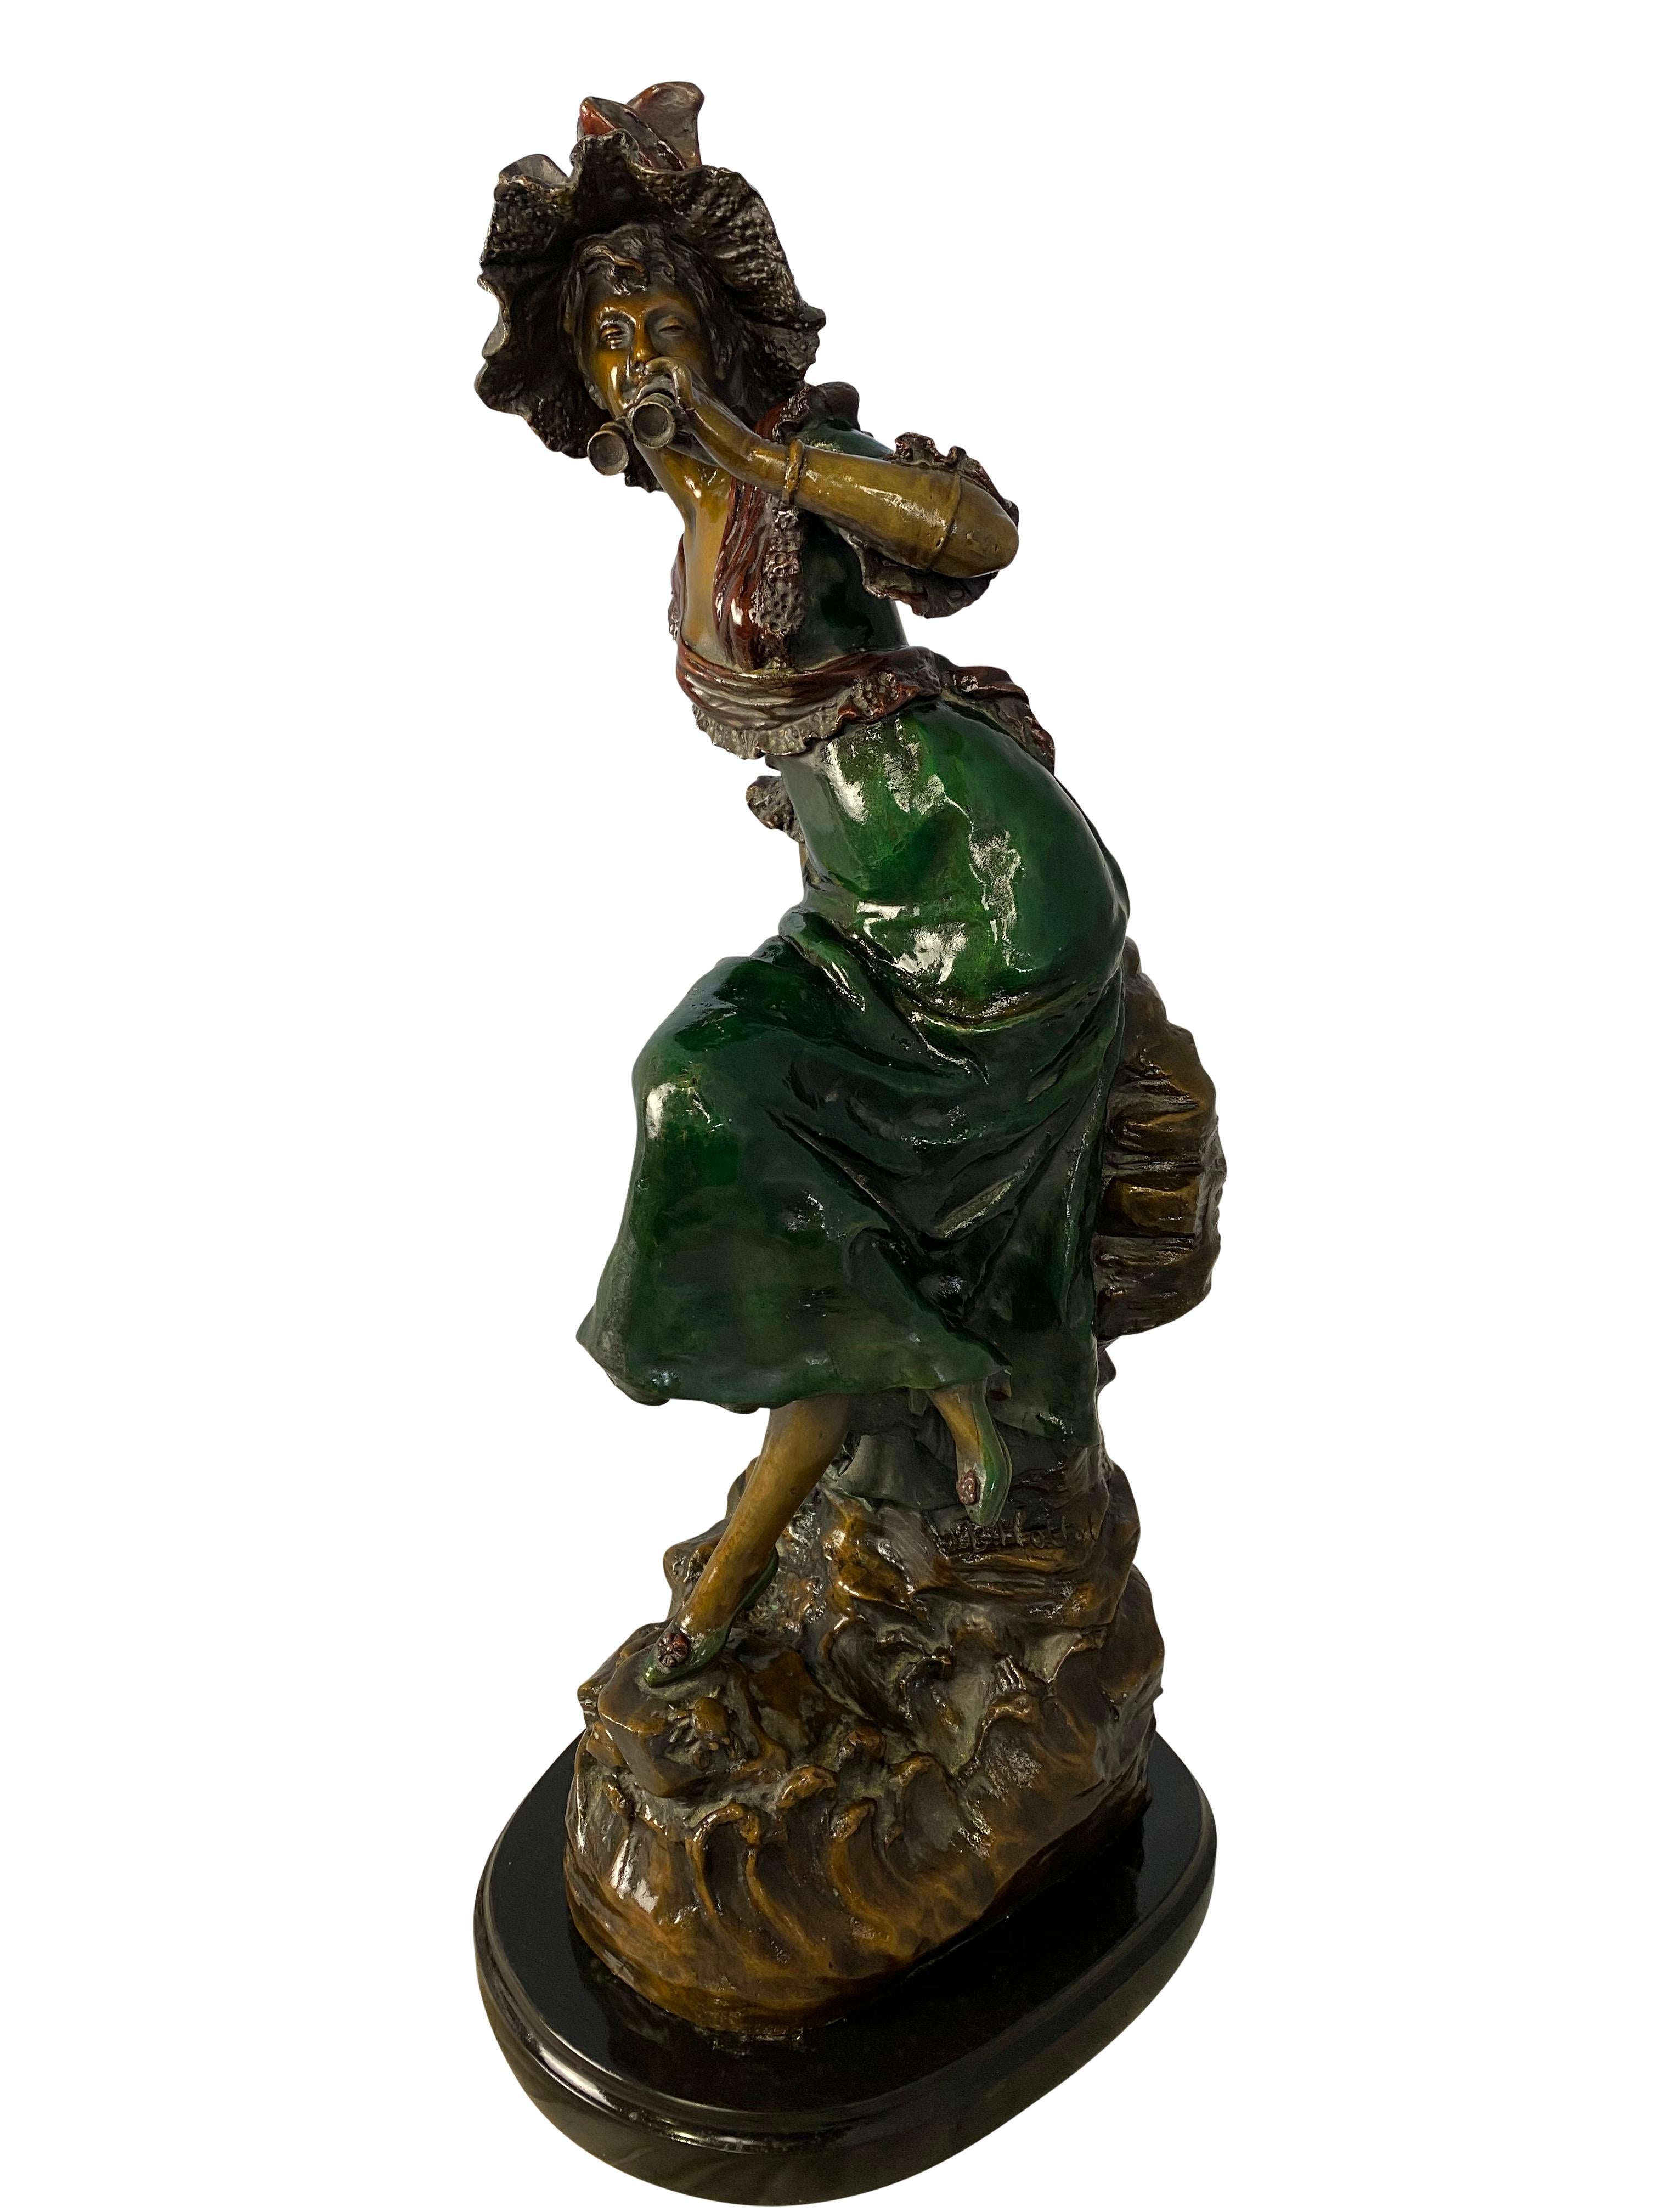 A fine 20th century statue of a two-tone patina bronze woman dressed in Classic Victorian clothing, holding a pair of theatre binoculars. Signed by the French artist Louis Hottot beneath the green dress. 

Dimensions (cm)
72 H/27 W/32 D.